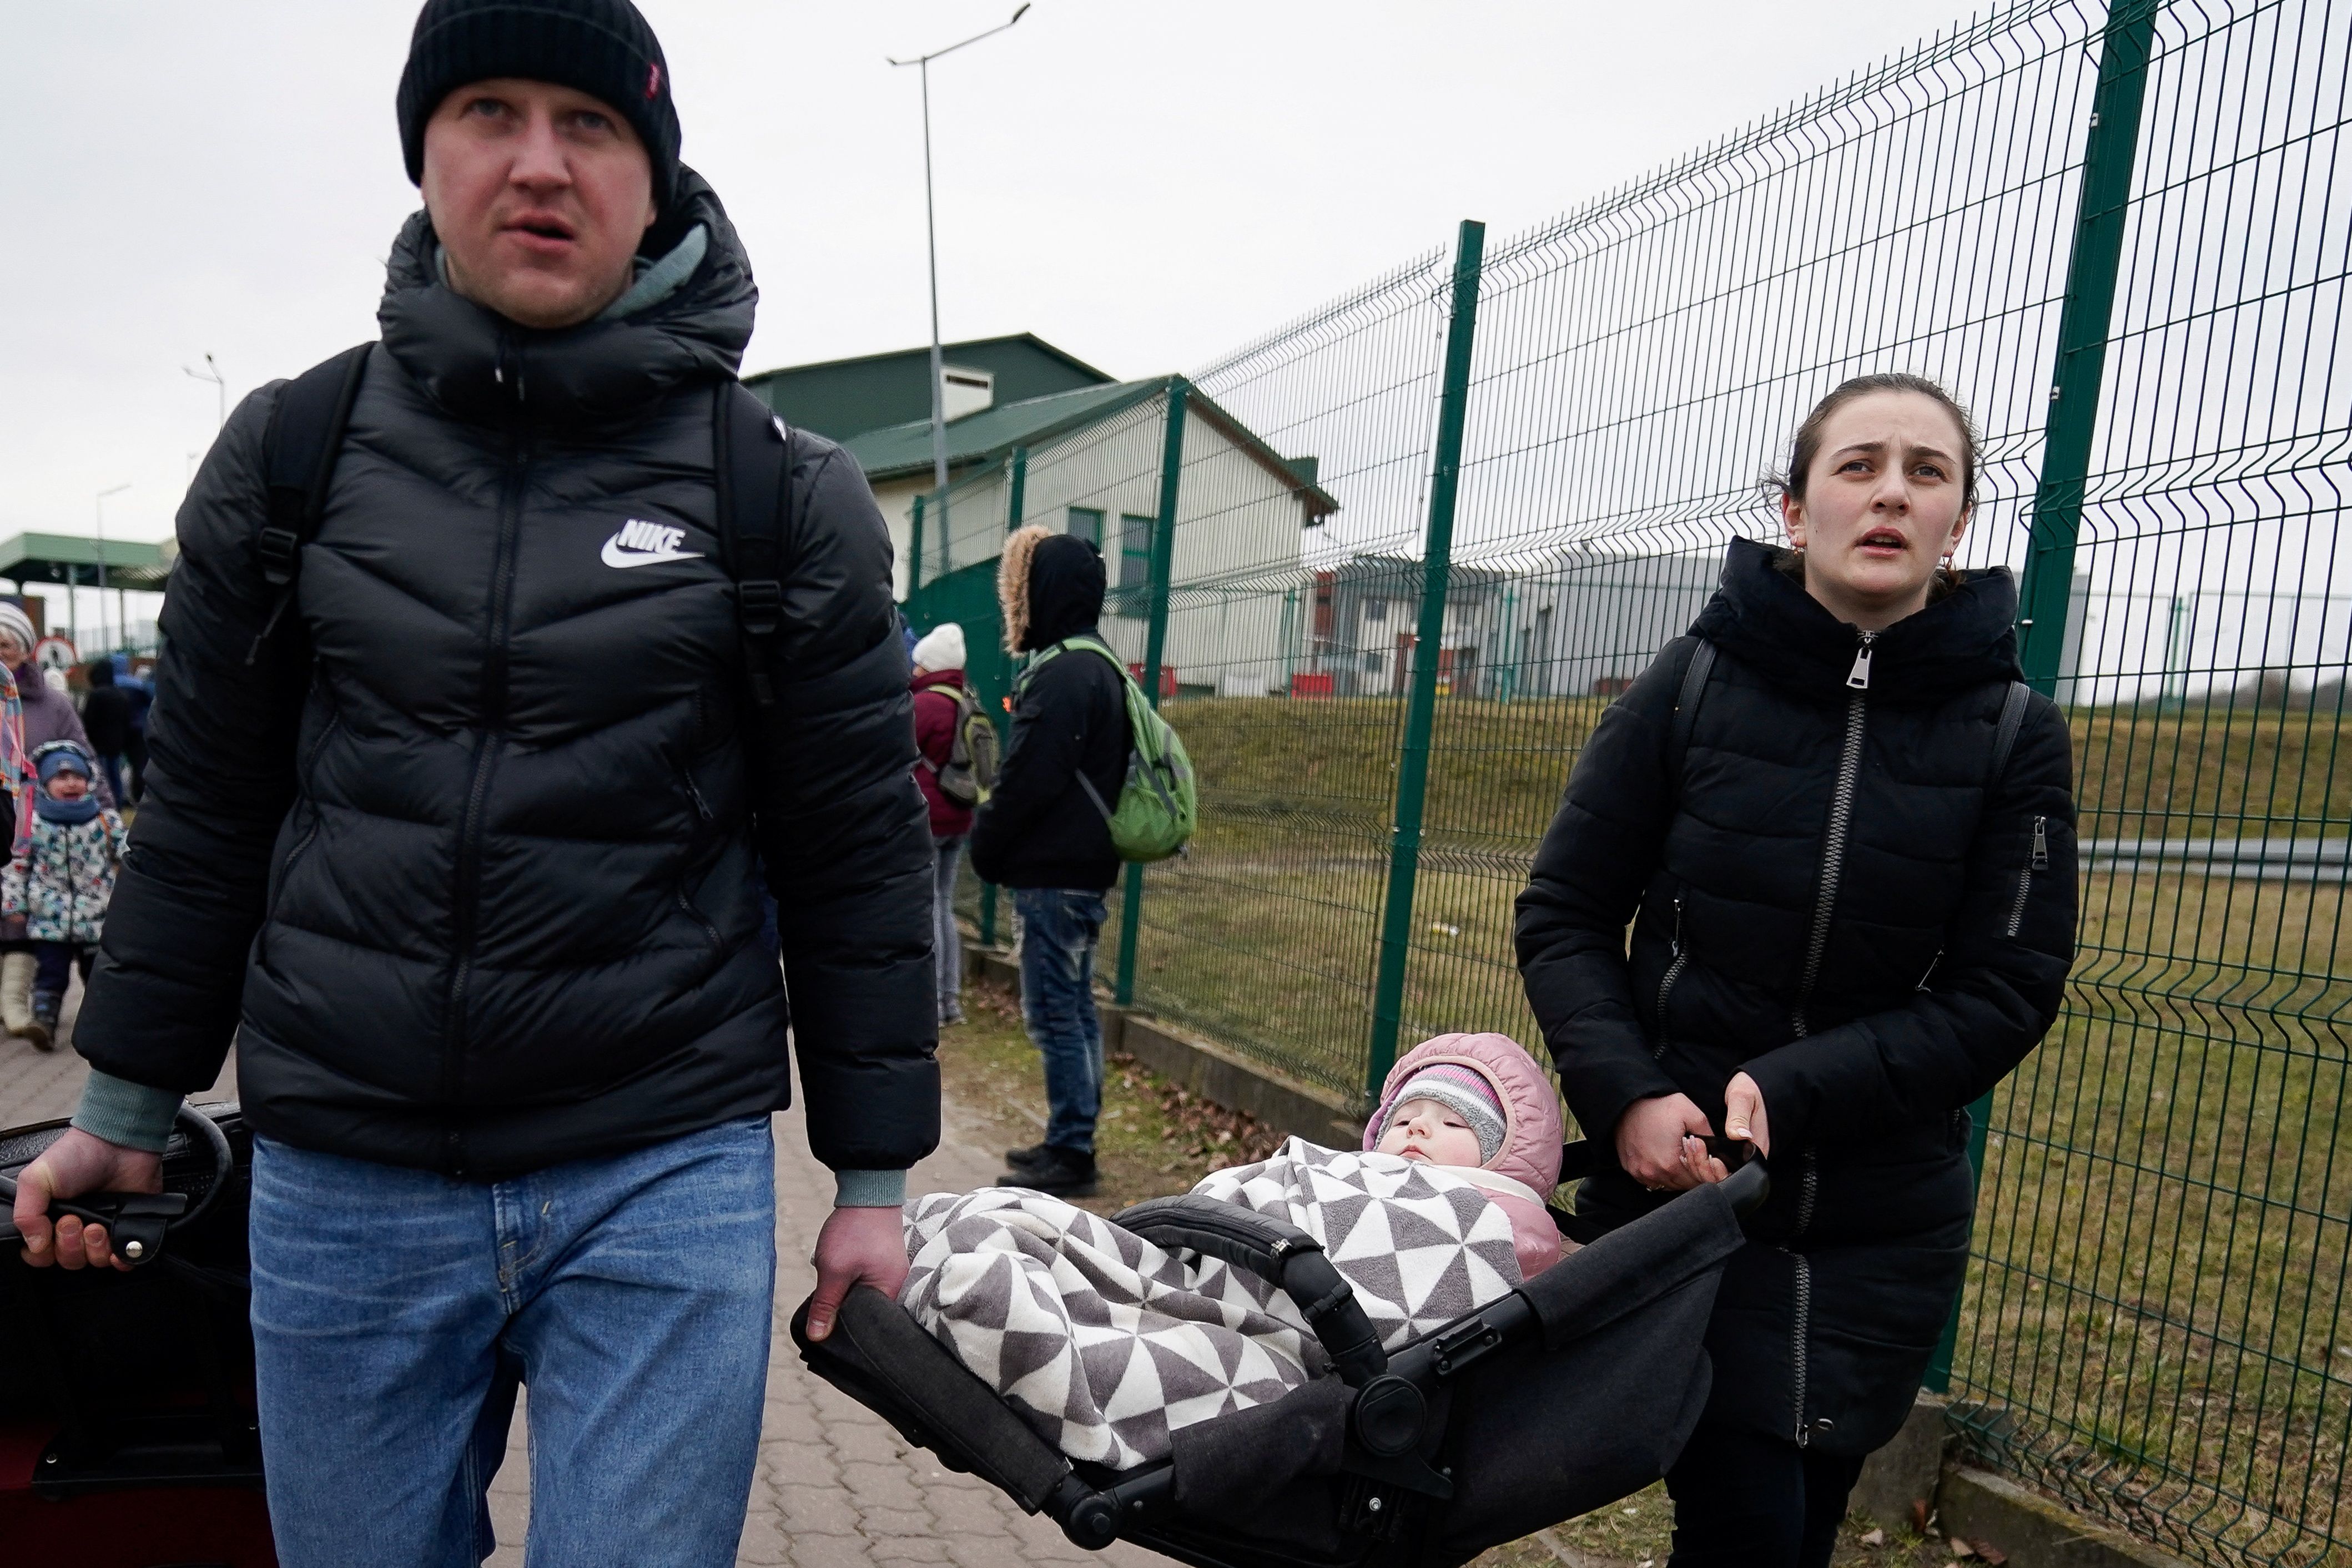 A family leaves the border after crossing to flee violence in Ukraine, in Medyka, Poland.  (REUTERS/Bryan Woolston).